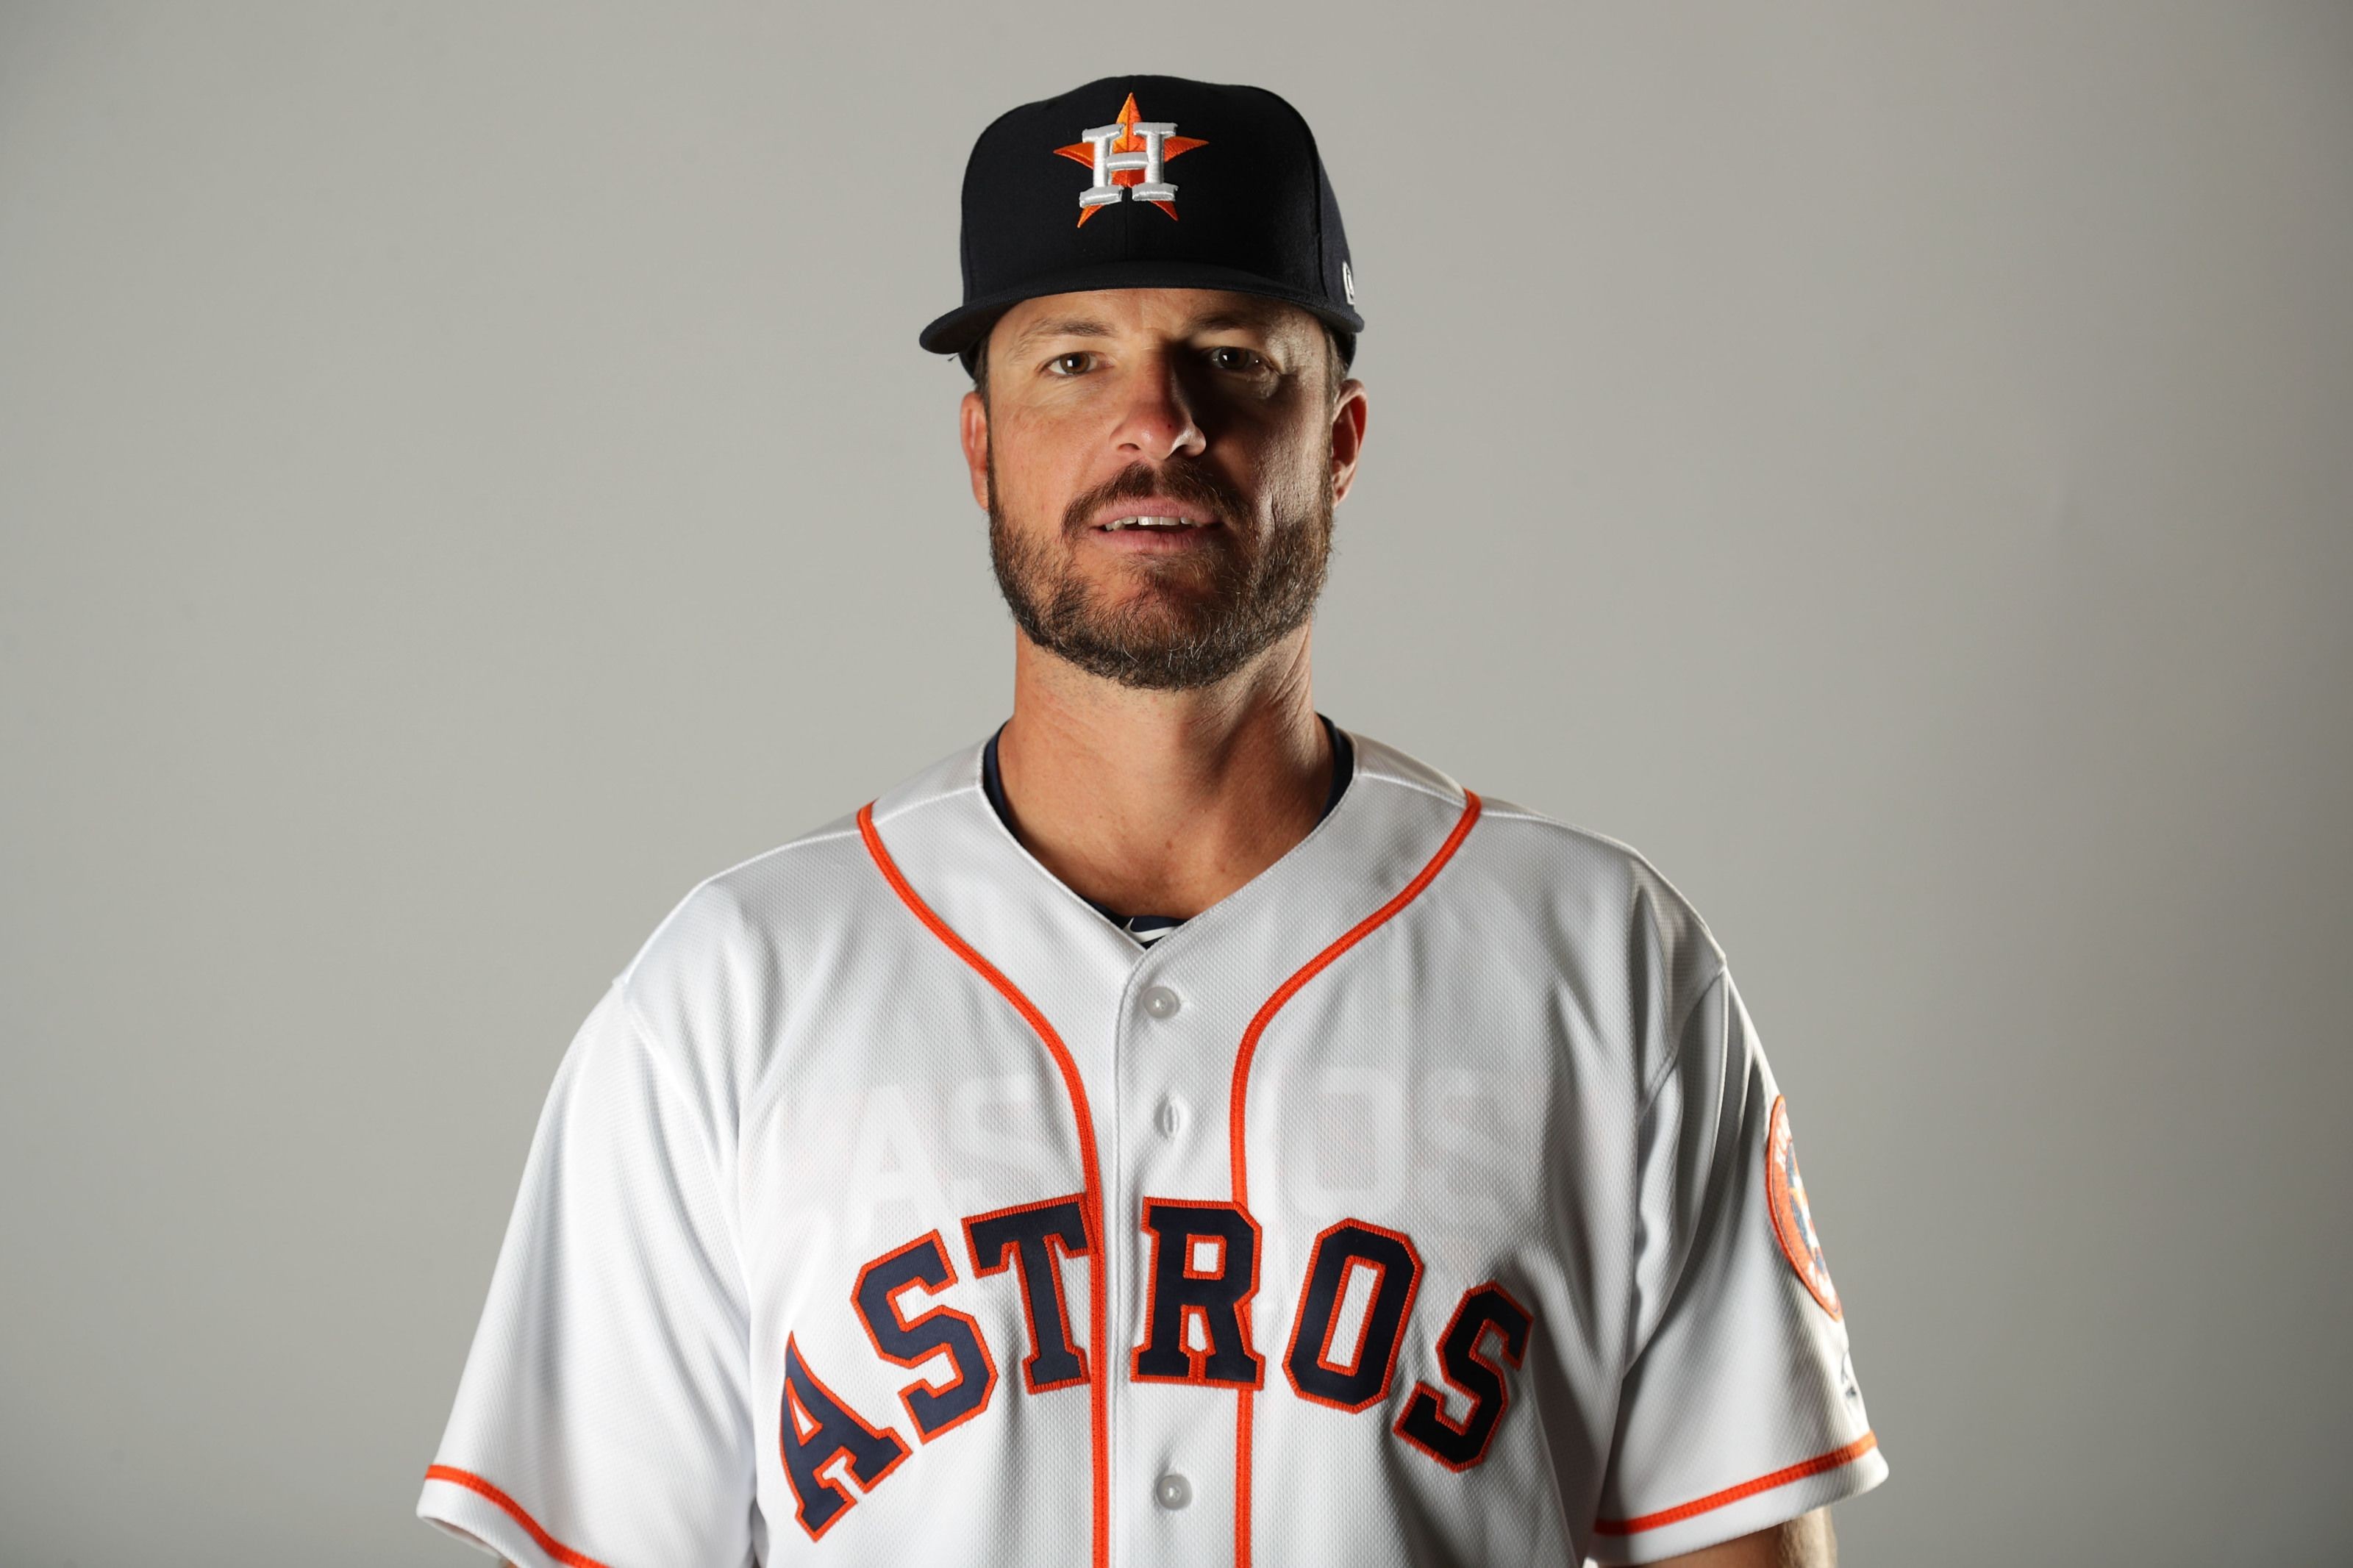 The LA Angels hire Astros Doug White as new pitching coach